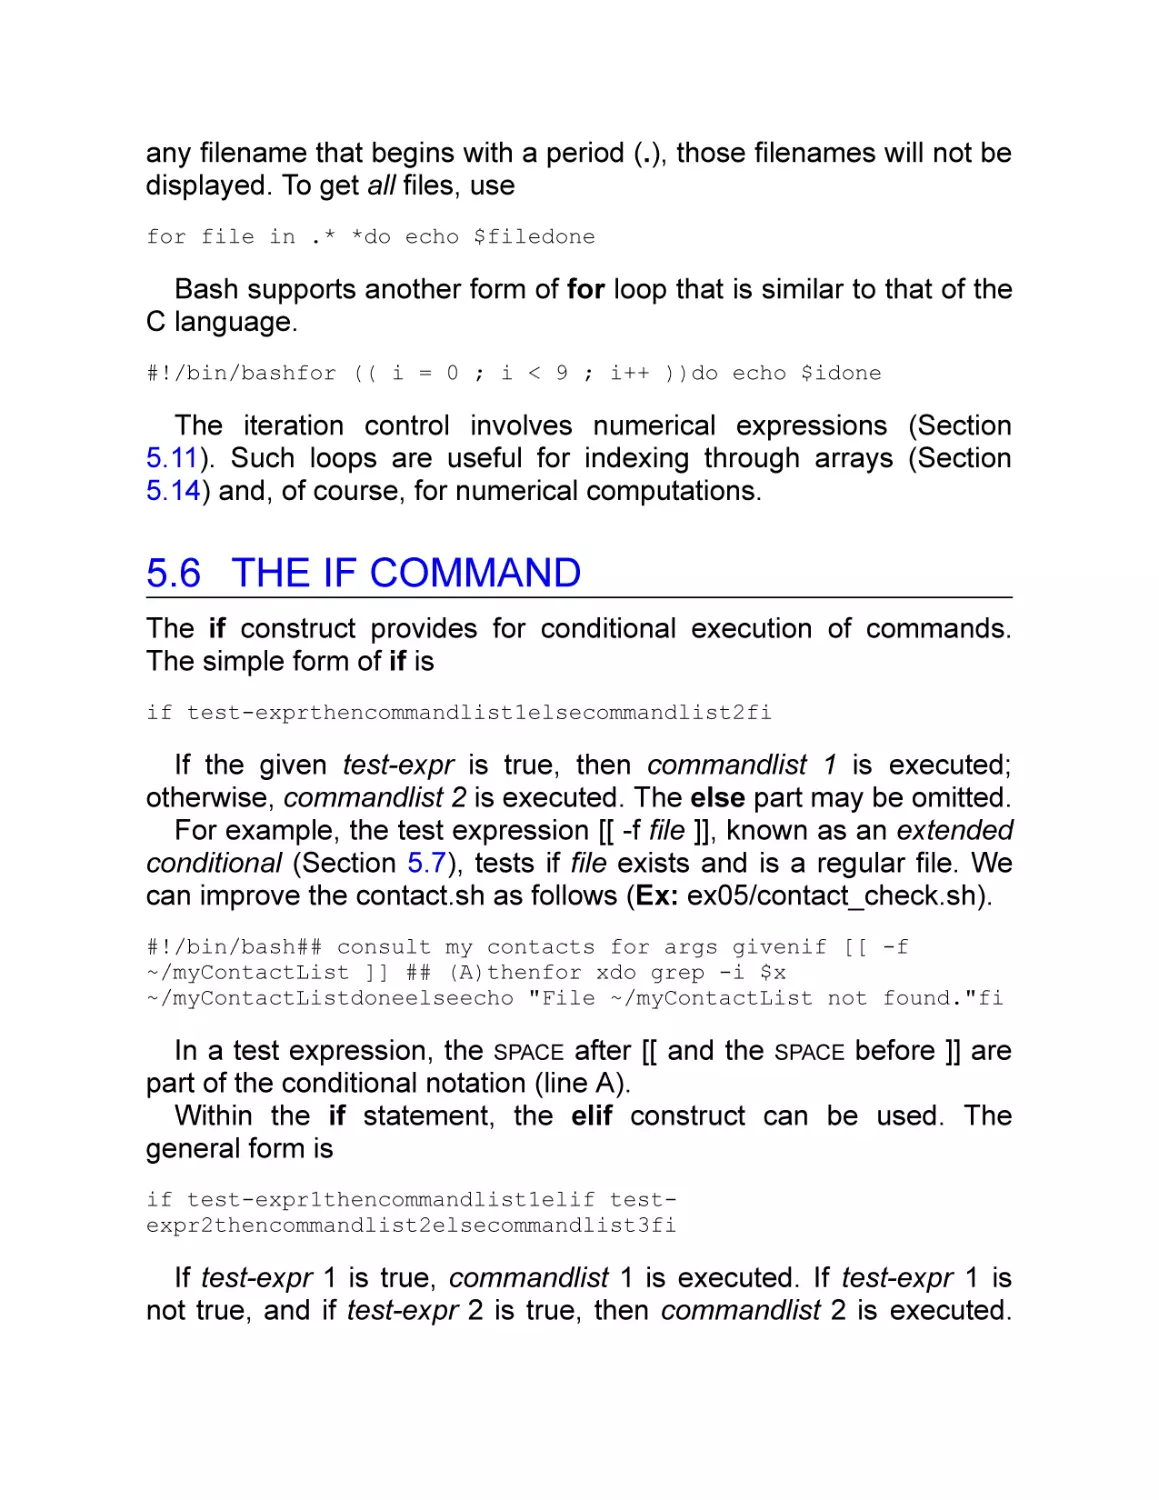 5.6 The if Command